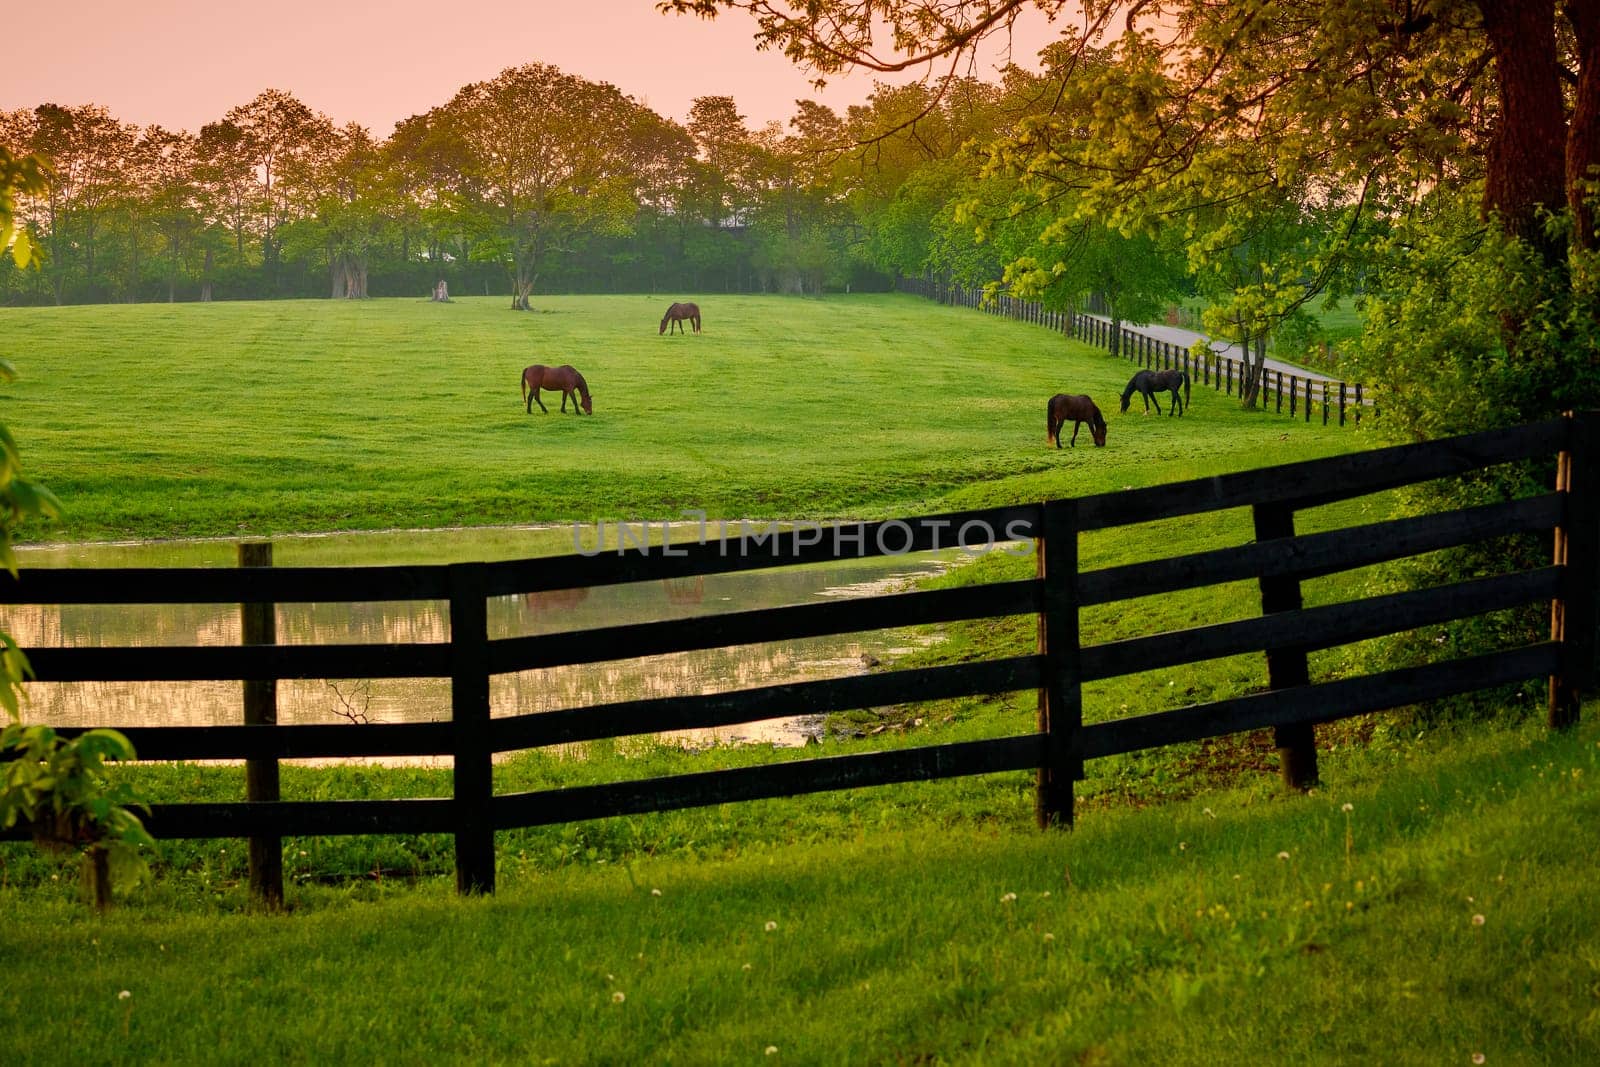 Horses grazing in a field with fence and pond.